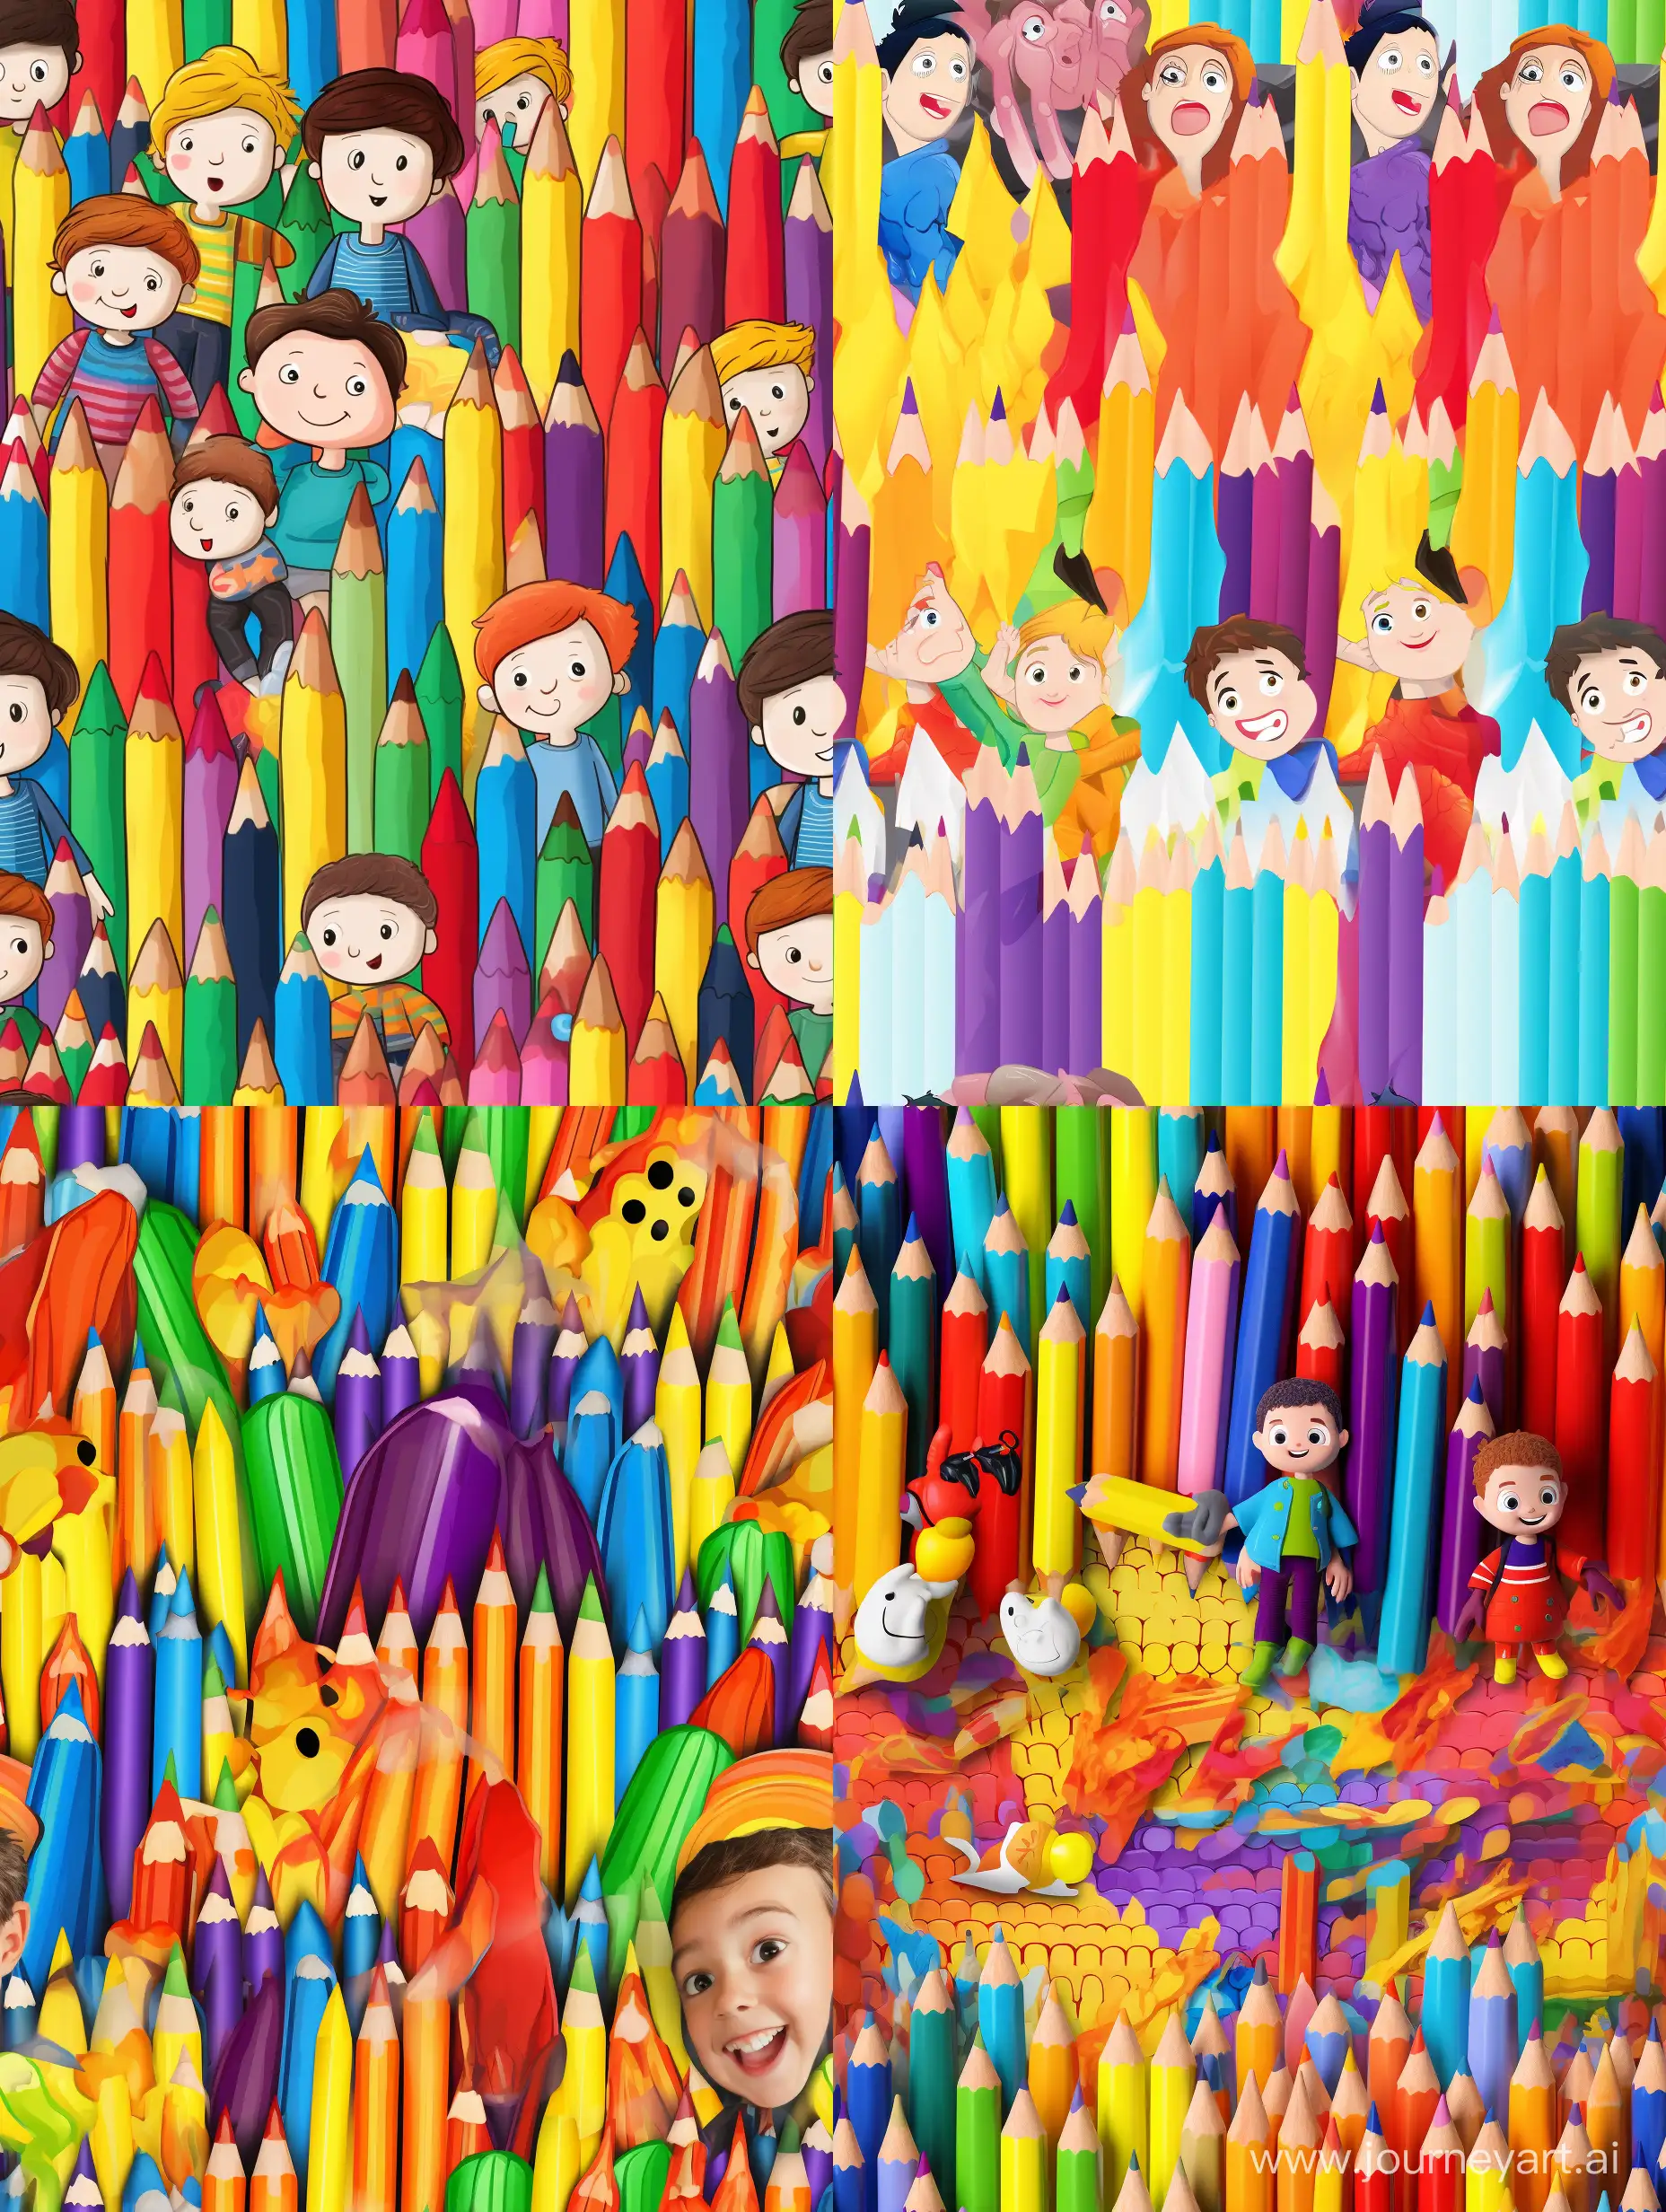 3d cinematic cartoon crayons felt, vibrant spectrum colors, funny style, with splats colors and sketchs drawing kids in background, --tile